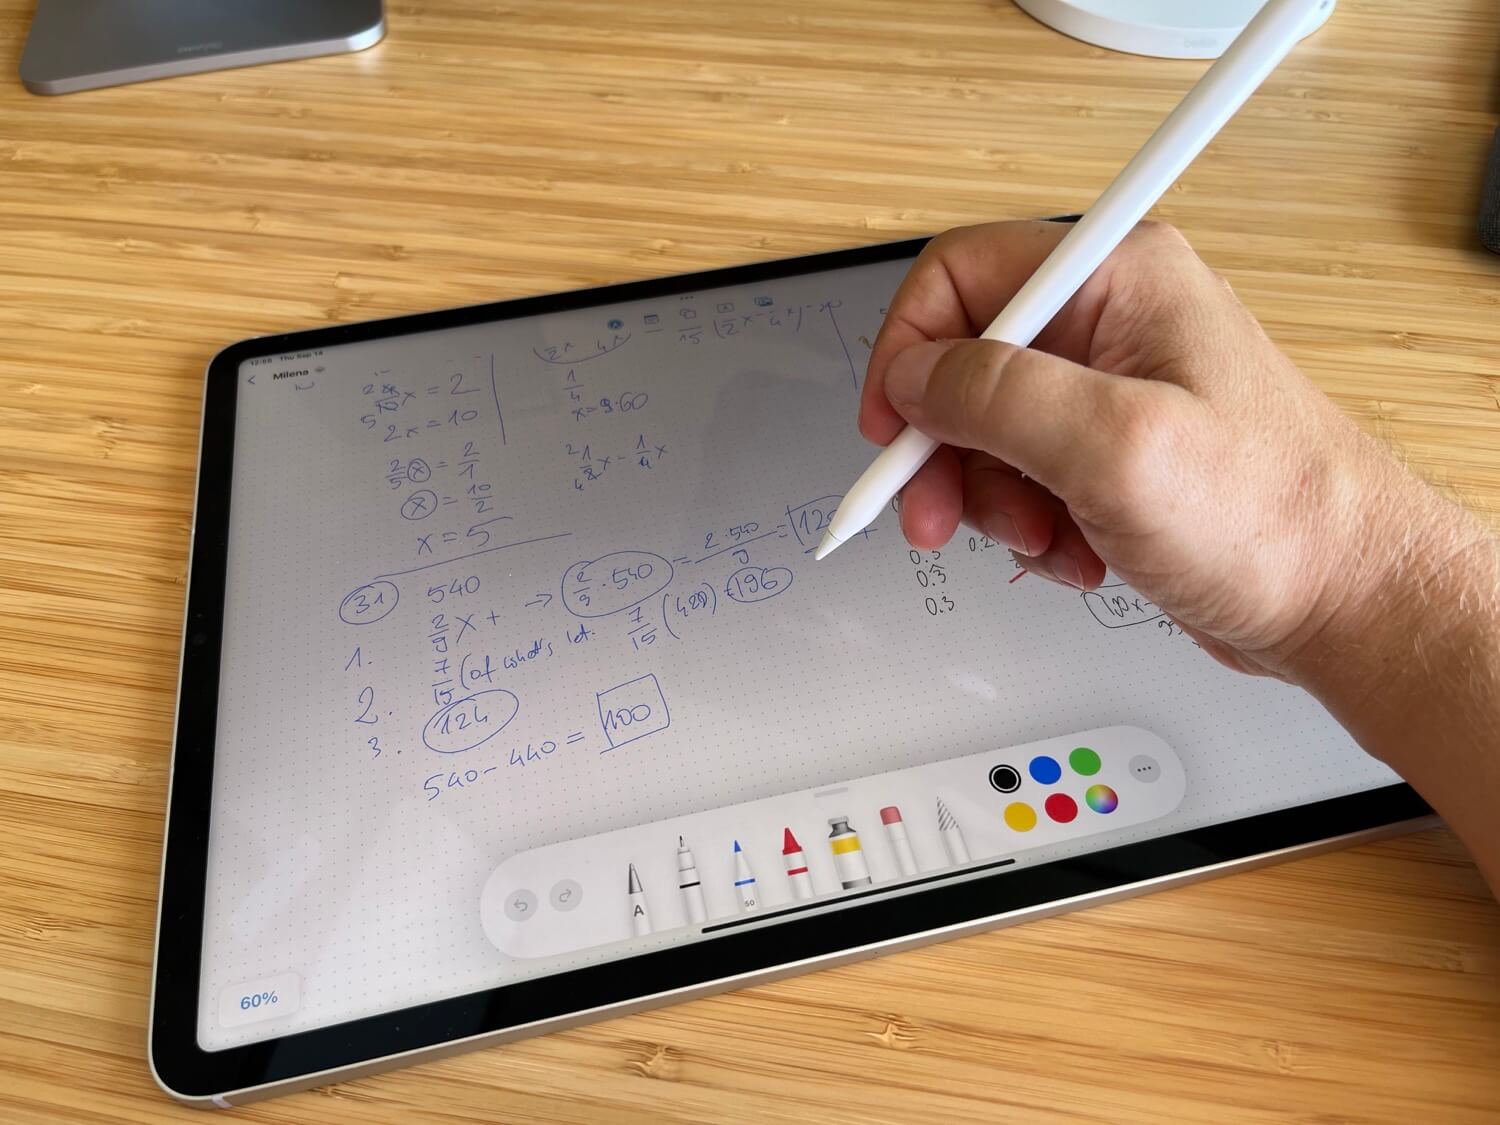 Why I must work on the iPad - the most versatile computer ever - M1 iPad Pro 13” review after 2 years maths